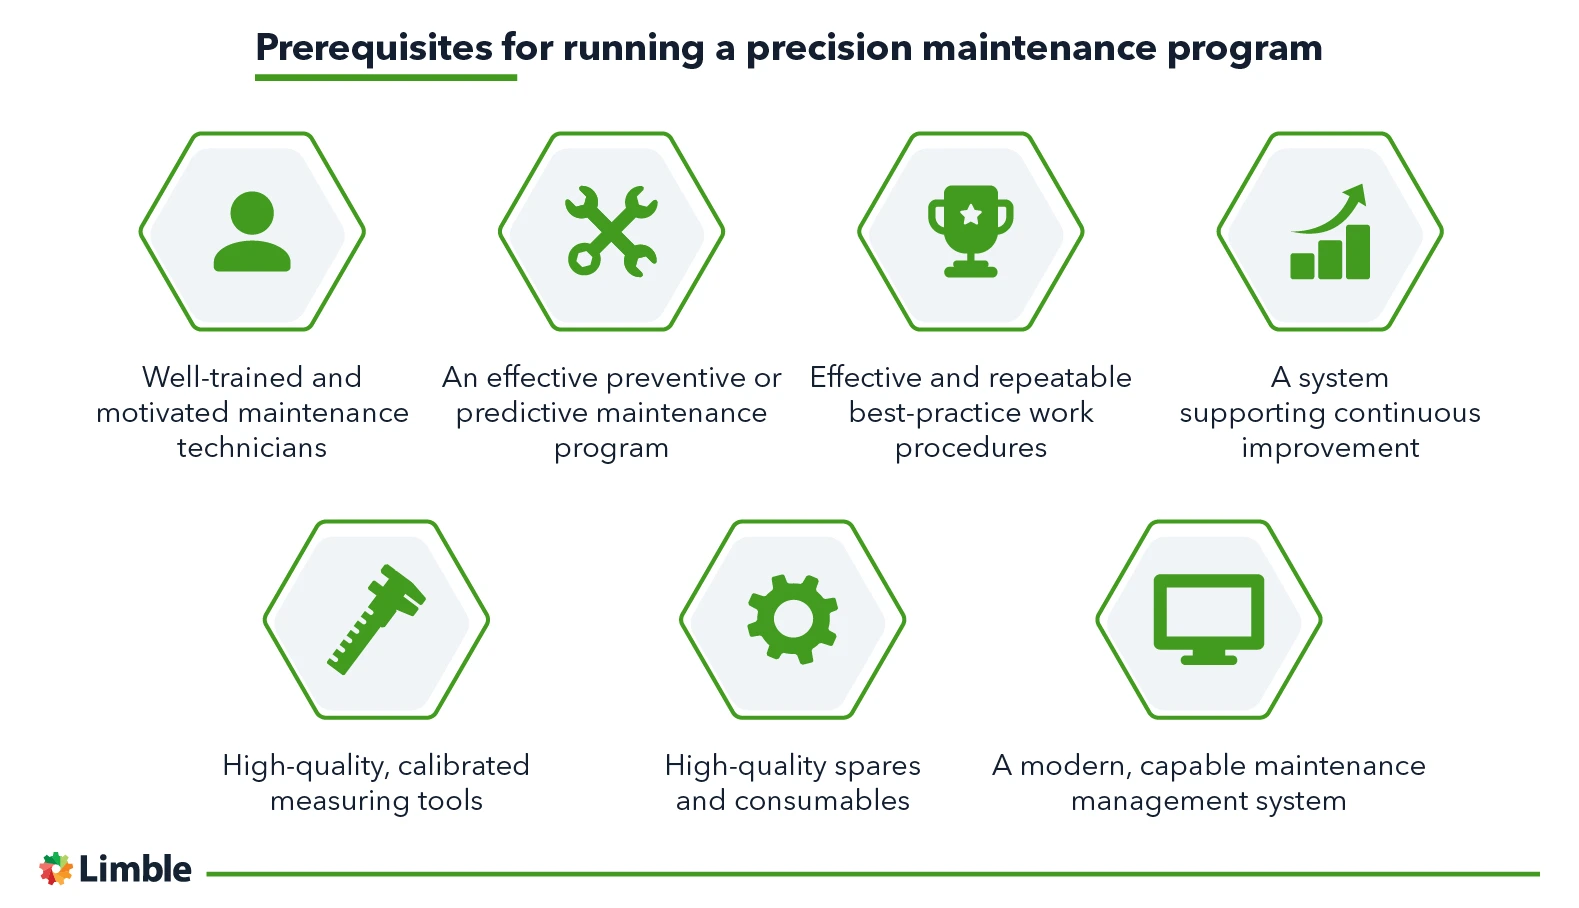 Prerequisites for implementing precision maintenance